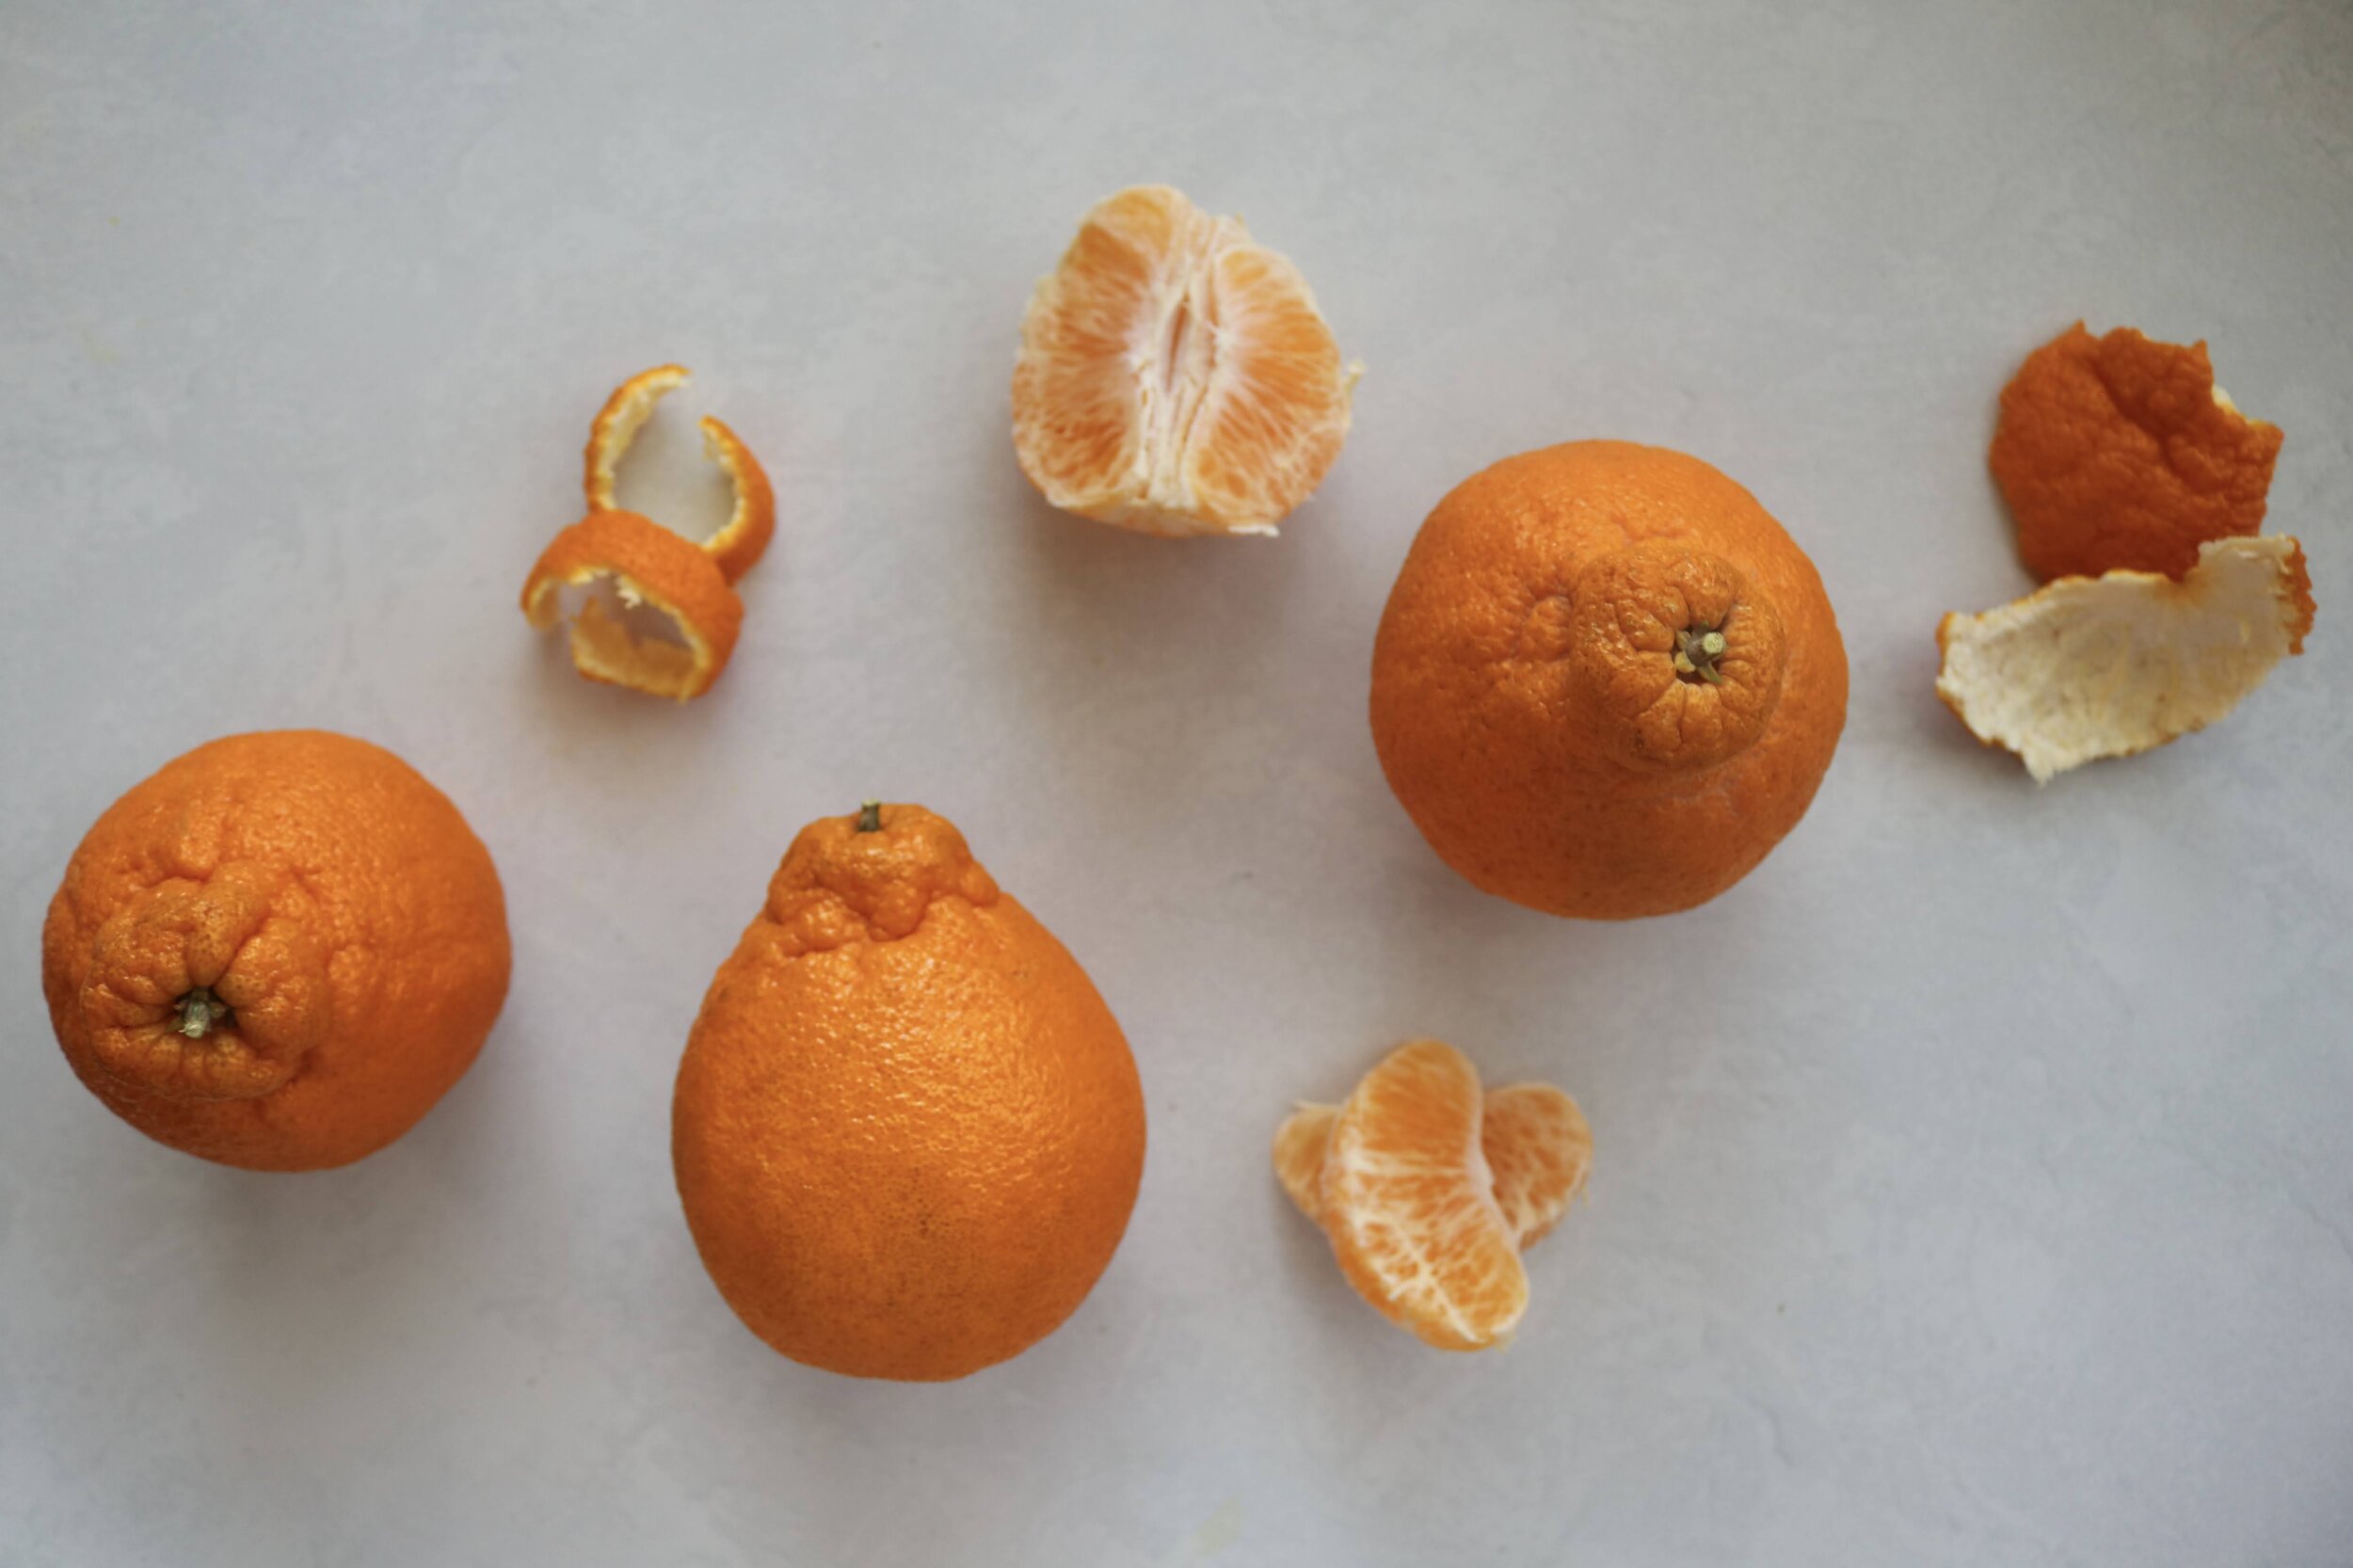 Food Find: Sumo citrus  Center for Science in the Public Interest